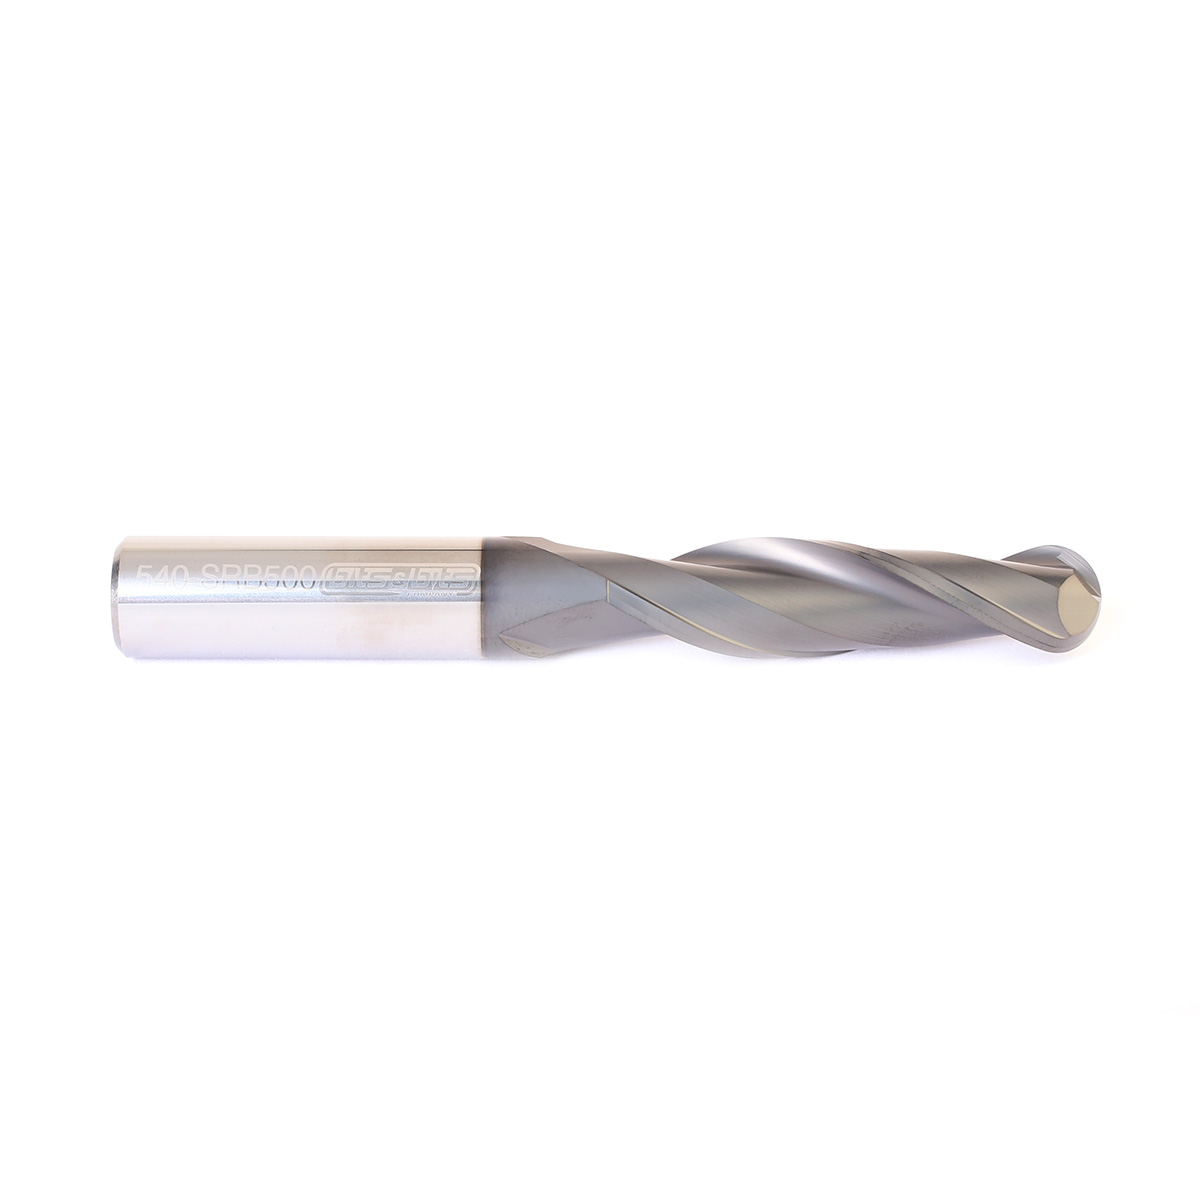 AT 18K 7 Stainless Steel Electronic Pointed Tip Straight